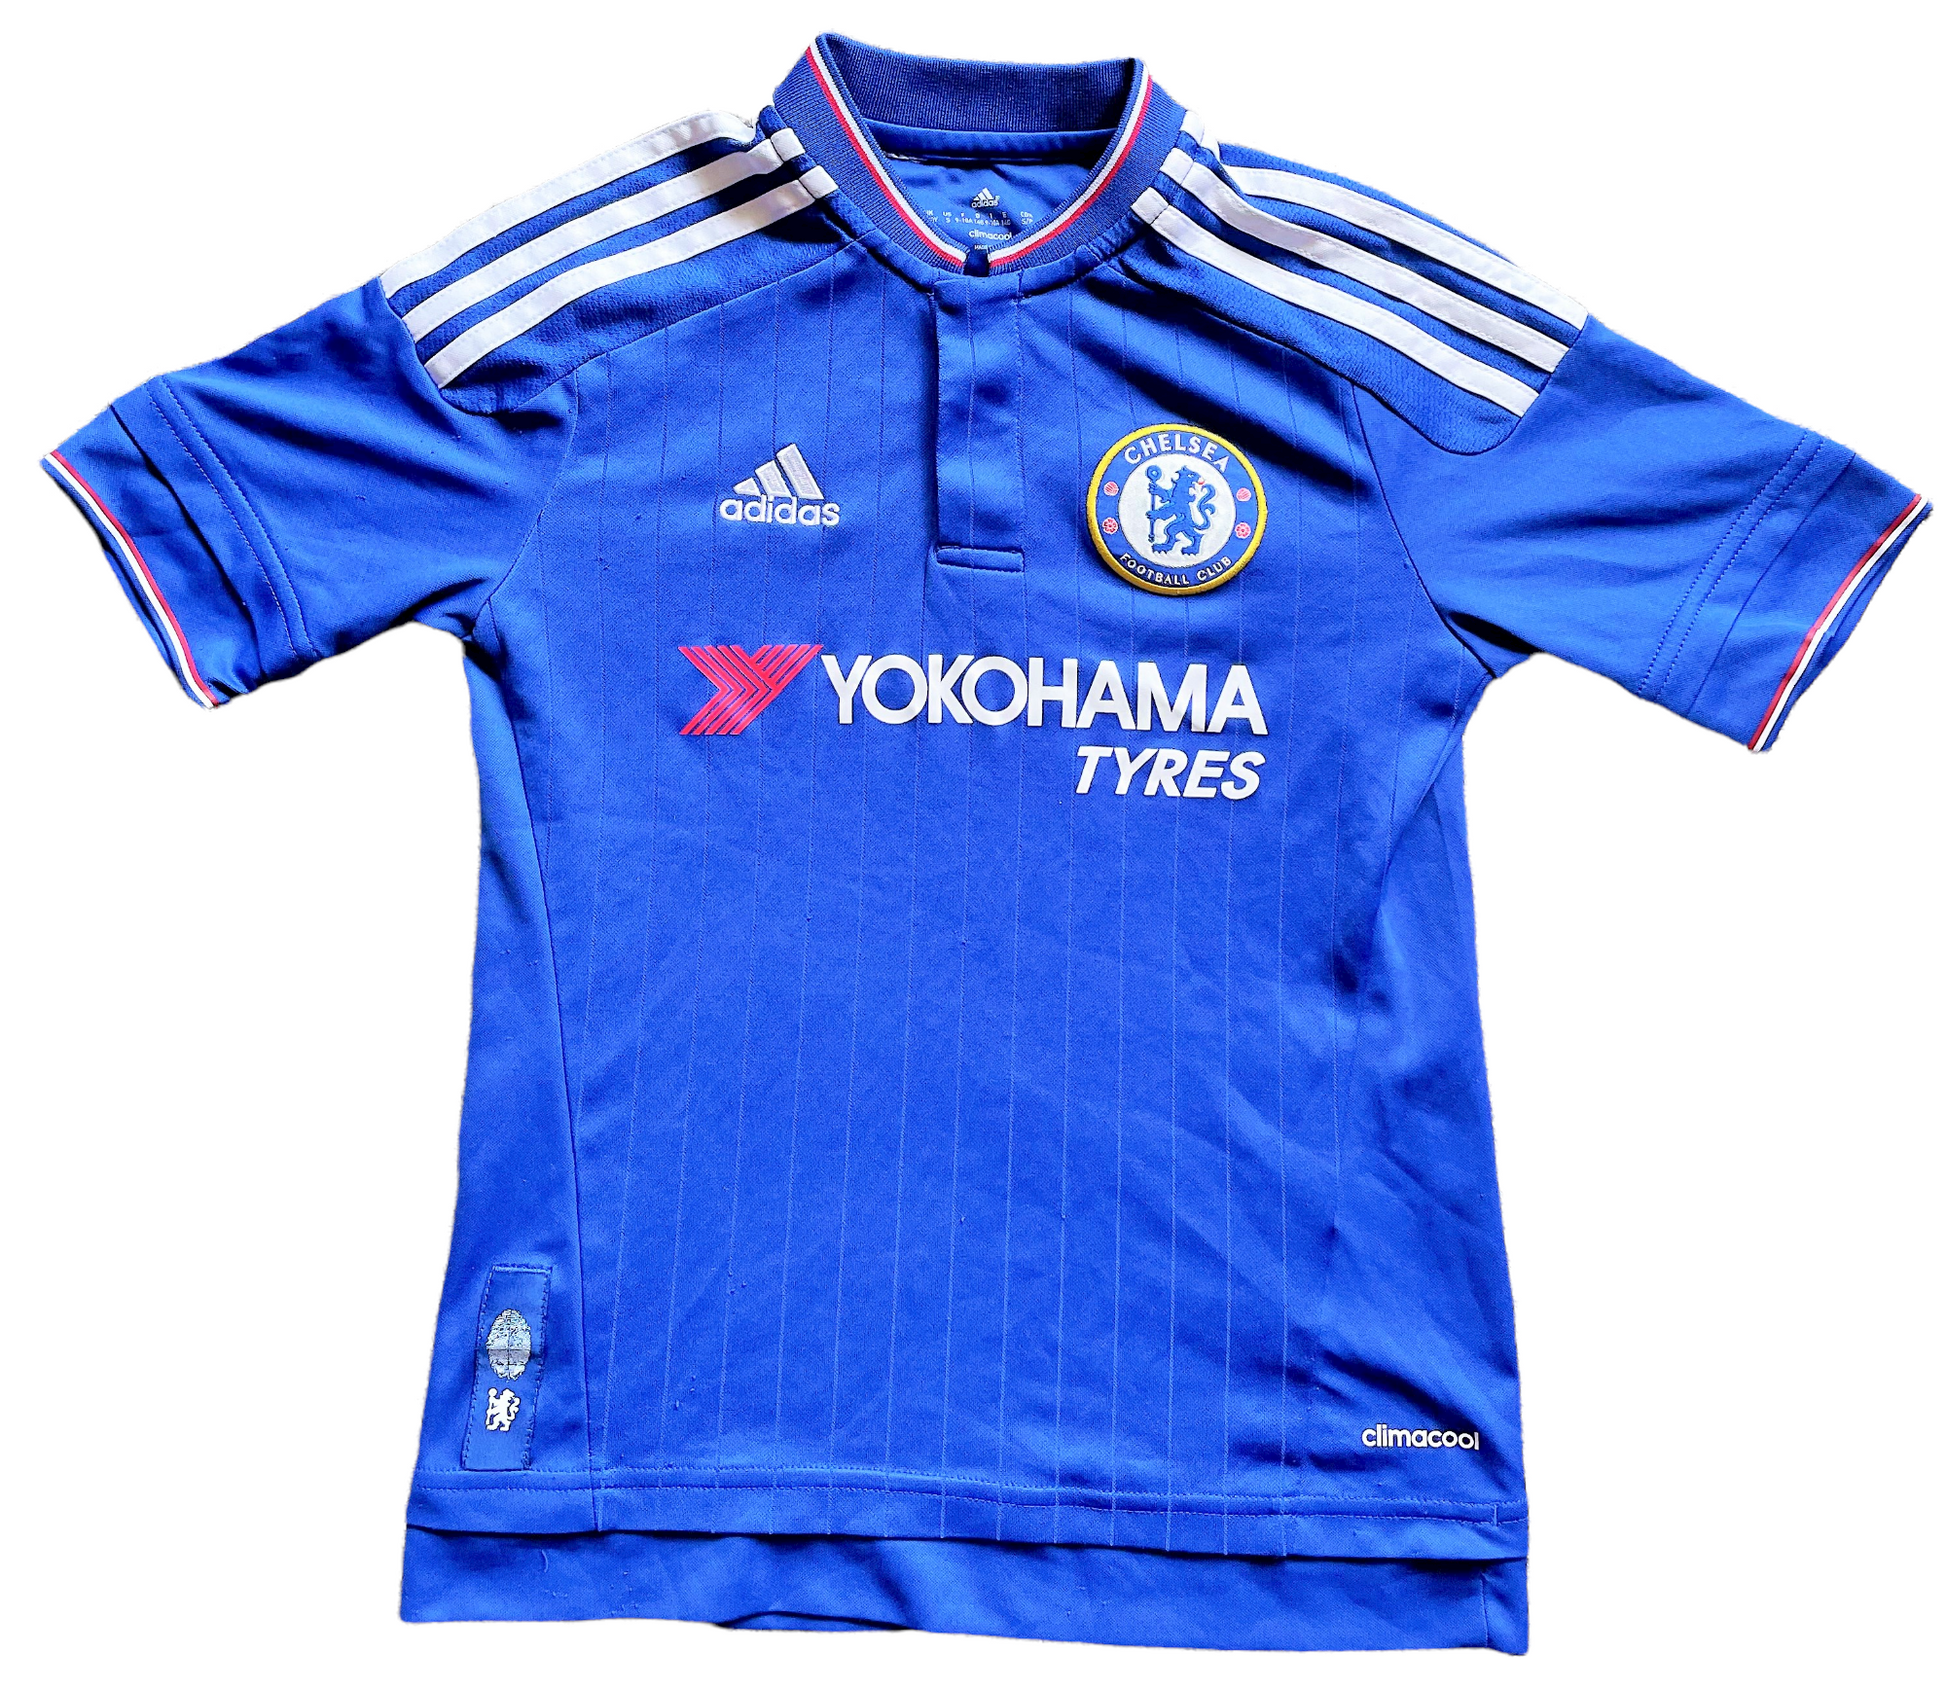 2015-16 Chelsea Home Shirt (good) Childs 9-10